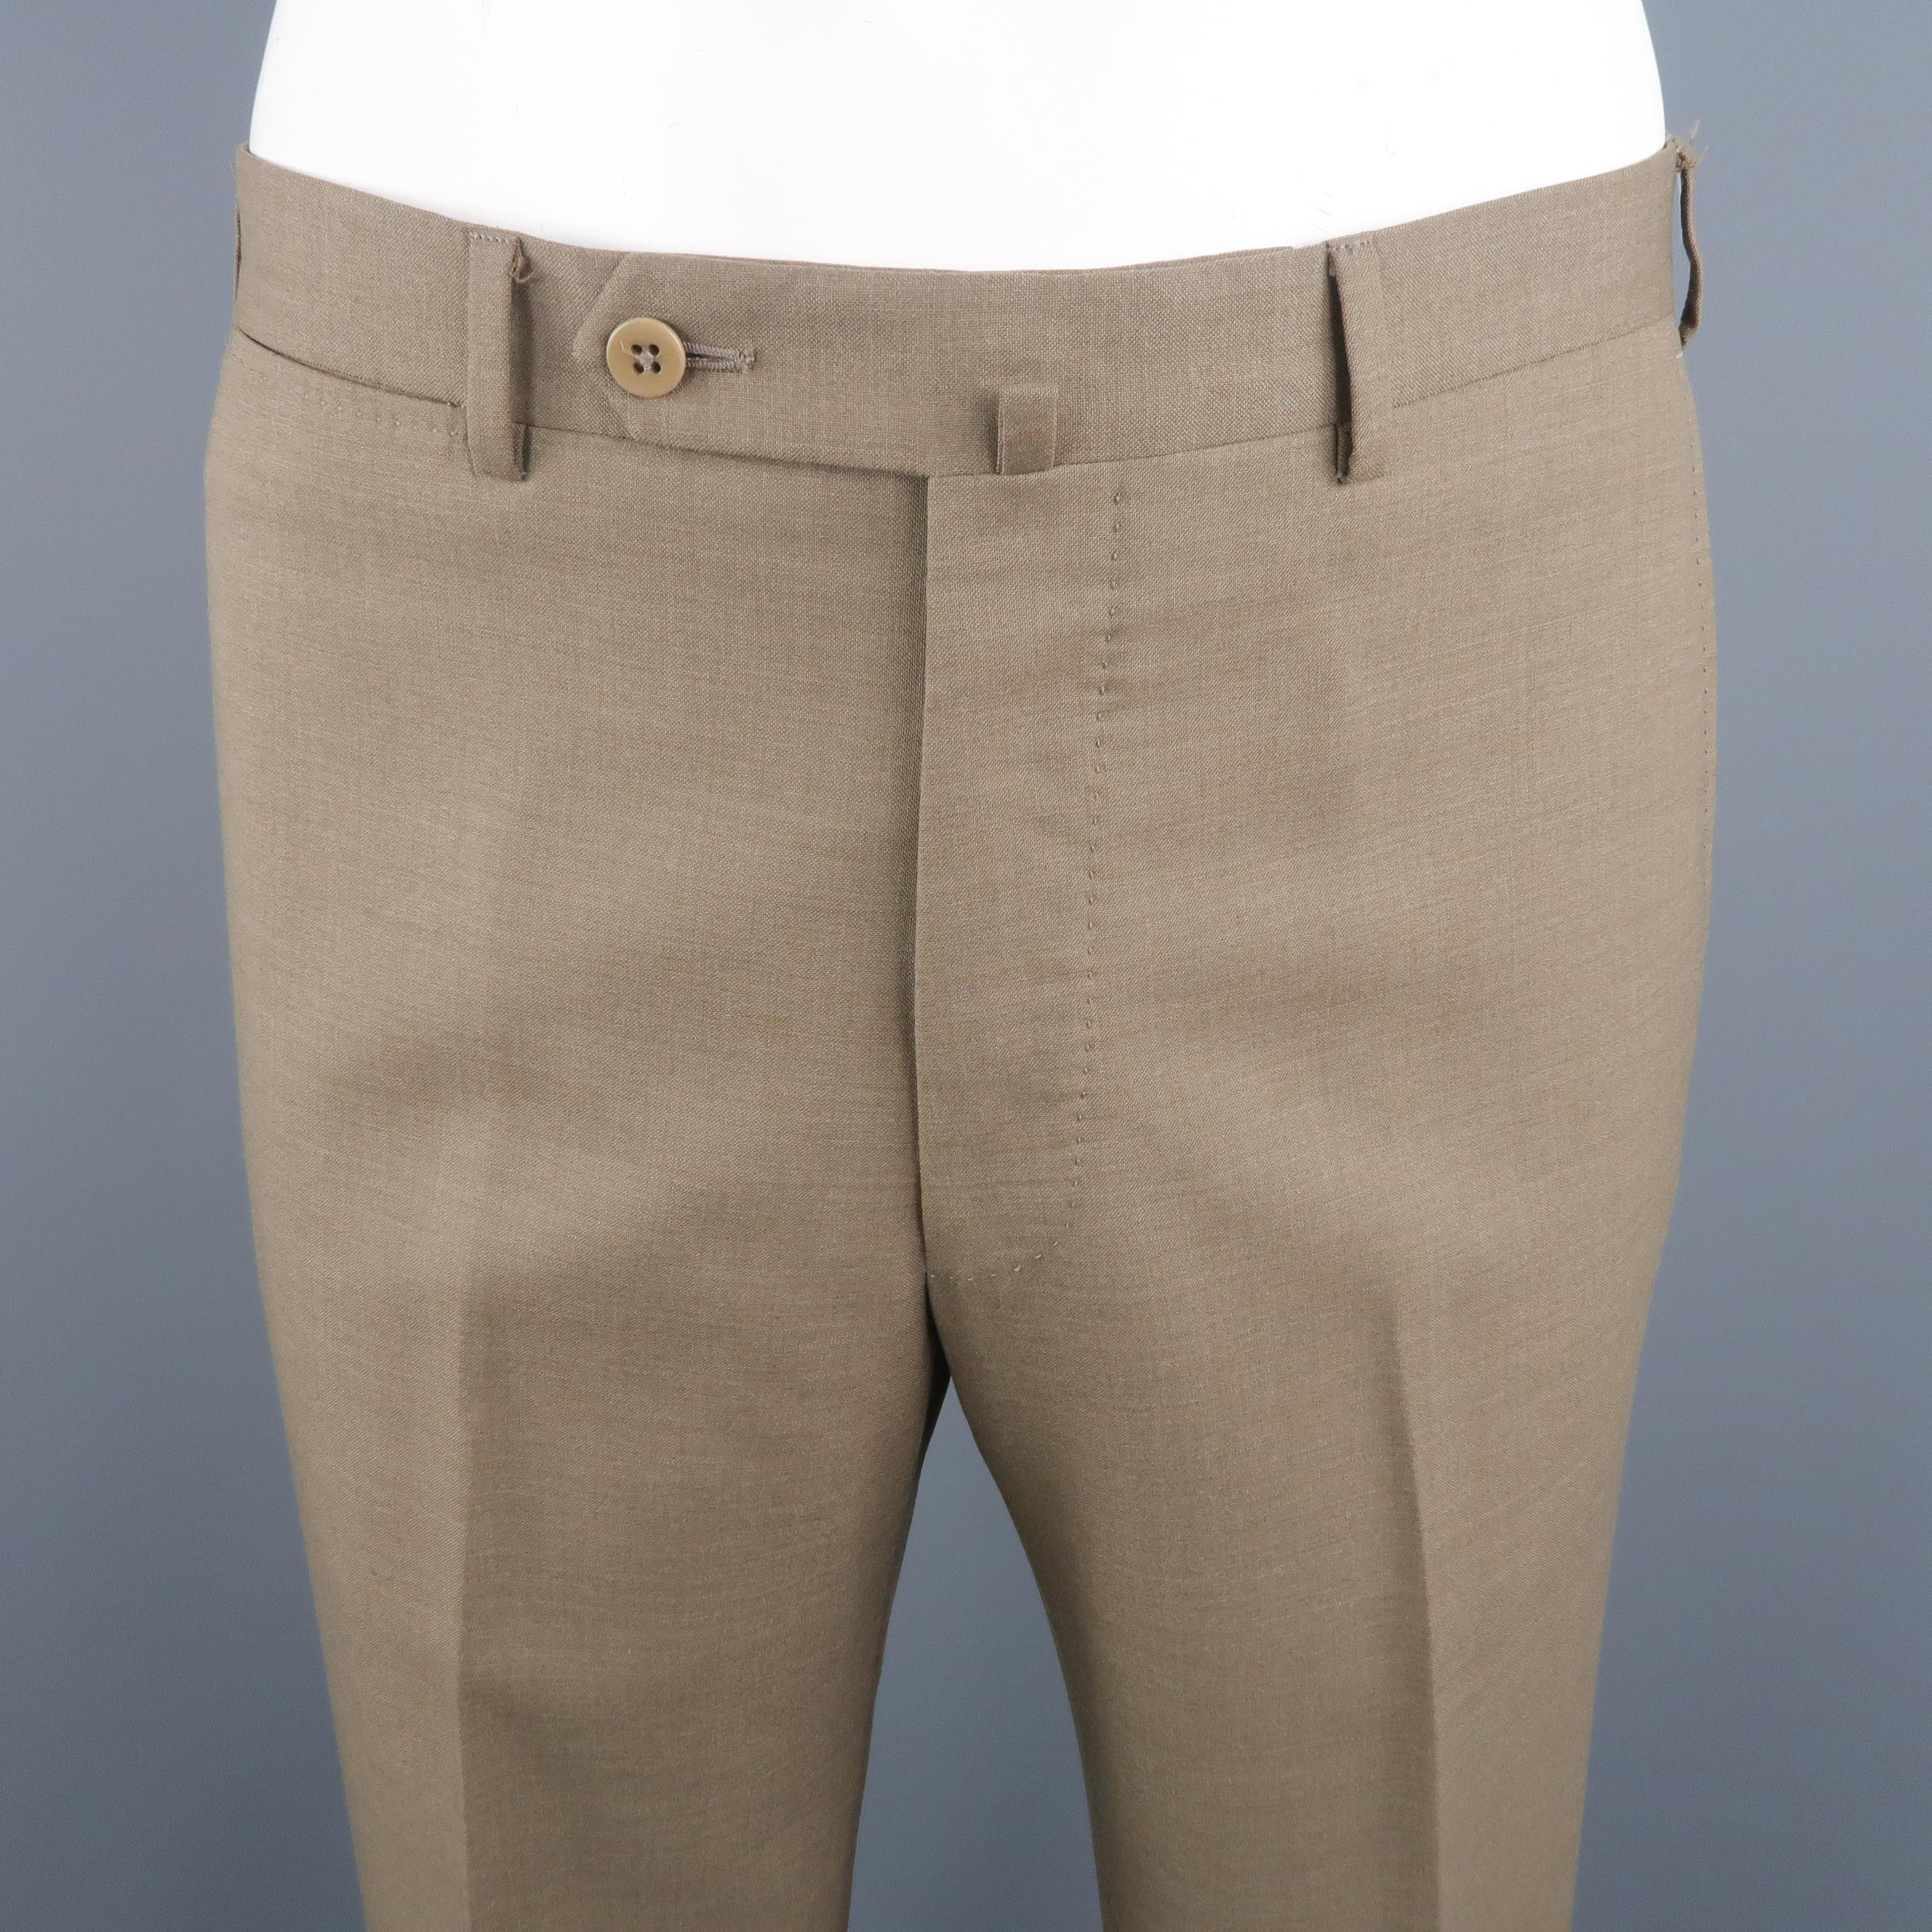 ERMENEGILDO ZEGNA dress pants come in olive tone, wool material with a front tab, slant side pockets and cuffed hem. Made in Romania.
 
Excellent Pre-Owned Condition.
Marked: 33 R  US
 
Measurements:
 
Waist: 35 in.
Rise: 11 in.
Inseam: 32 in.